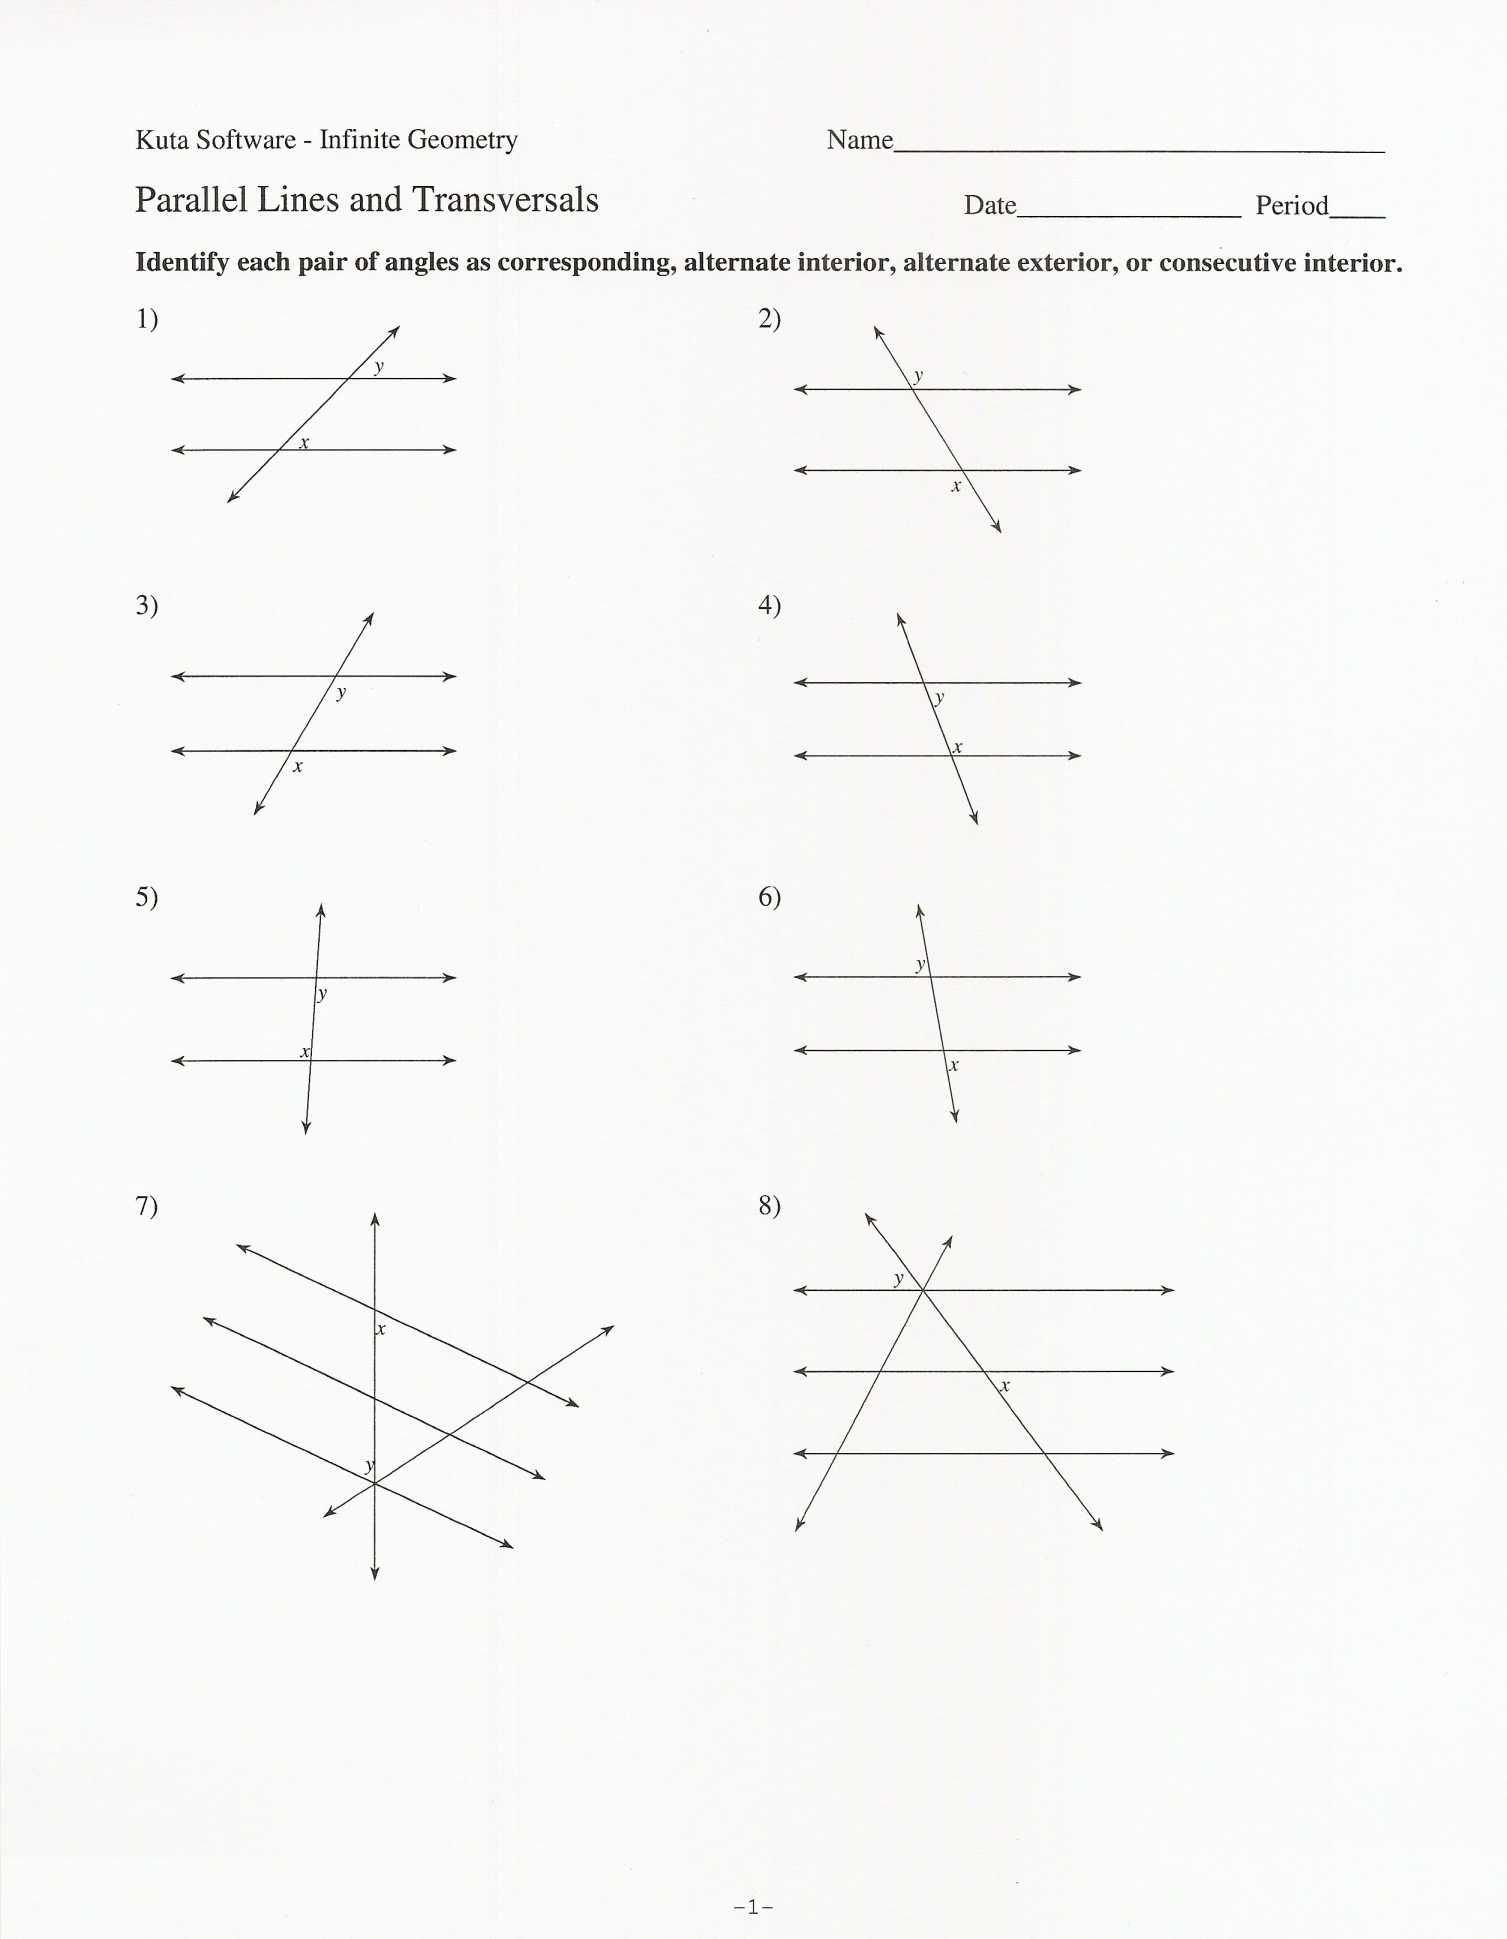 Bafea Proving Parallel Lines Worksheet With Answers Great Books With Regard To Proving Parallel Lines Worksheet With Answers